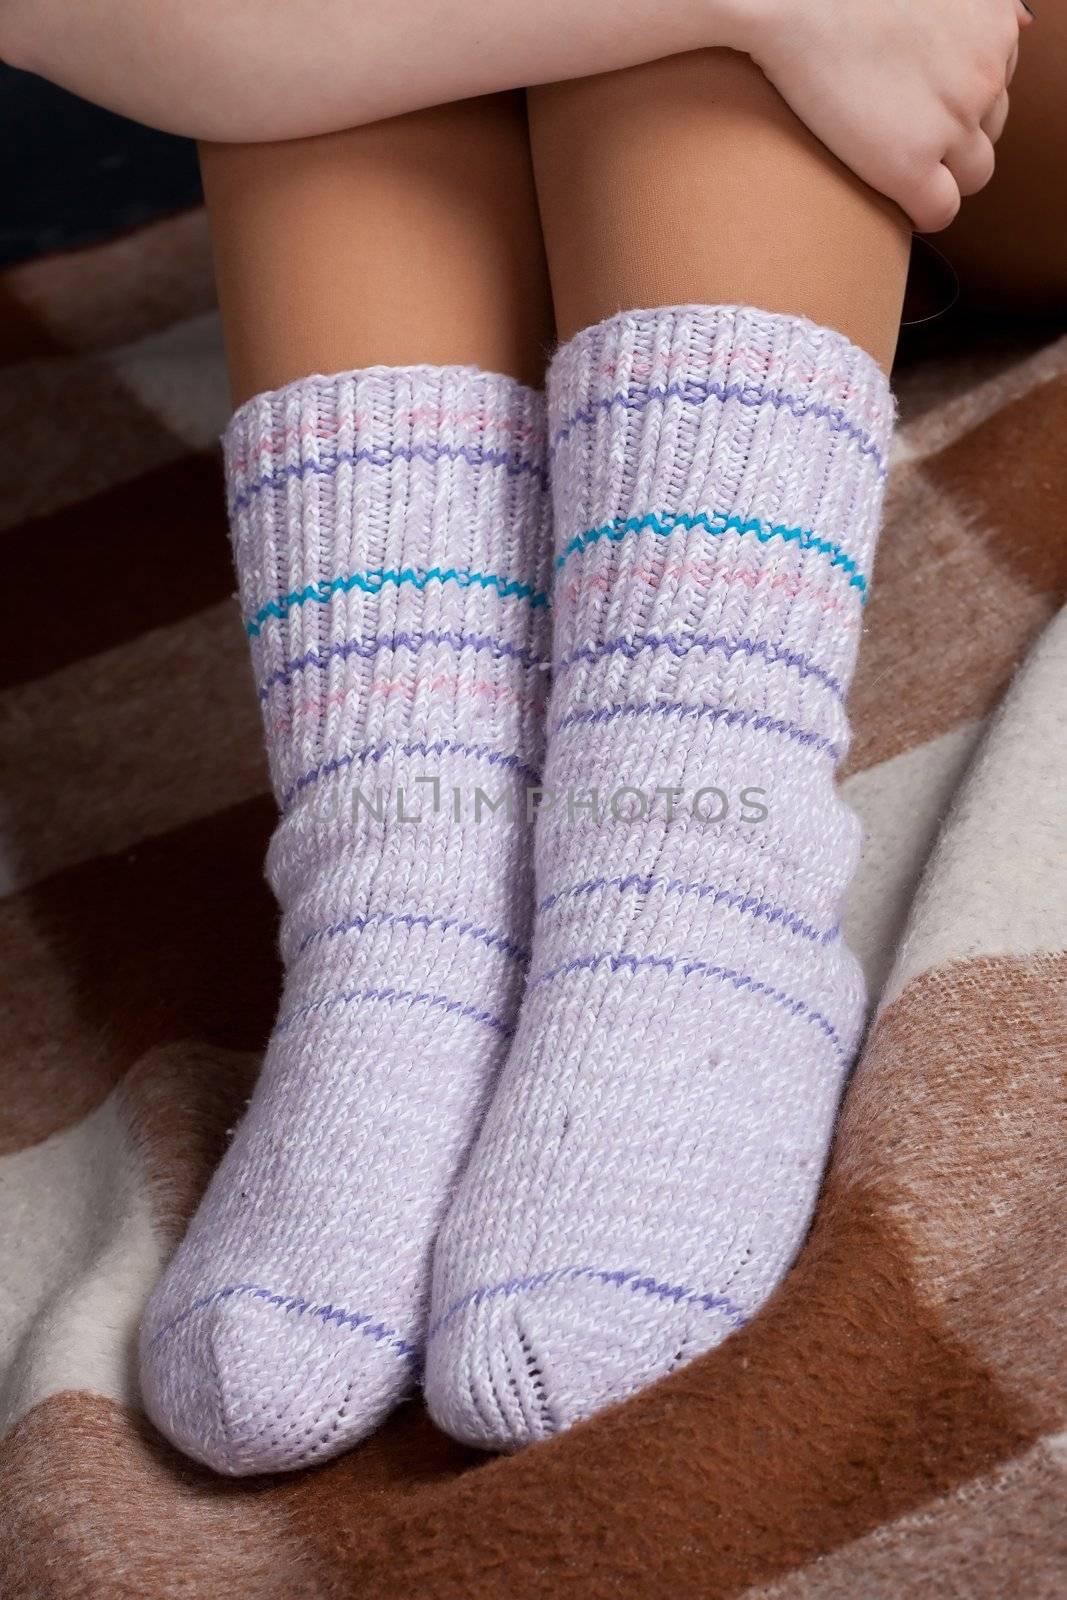 knitted socks by victosha